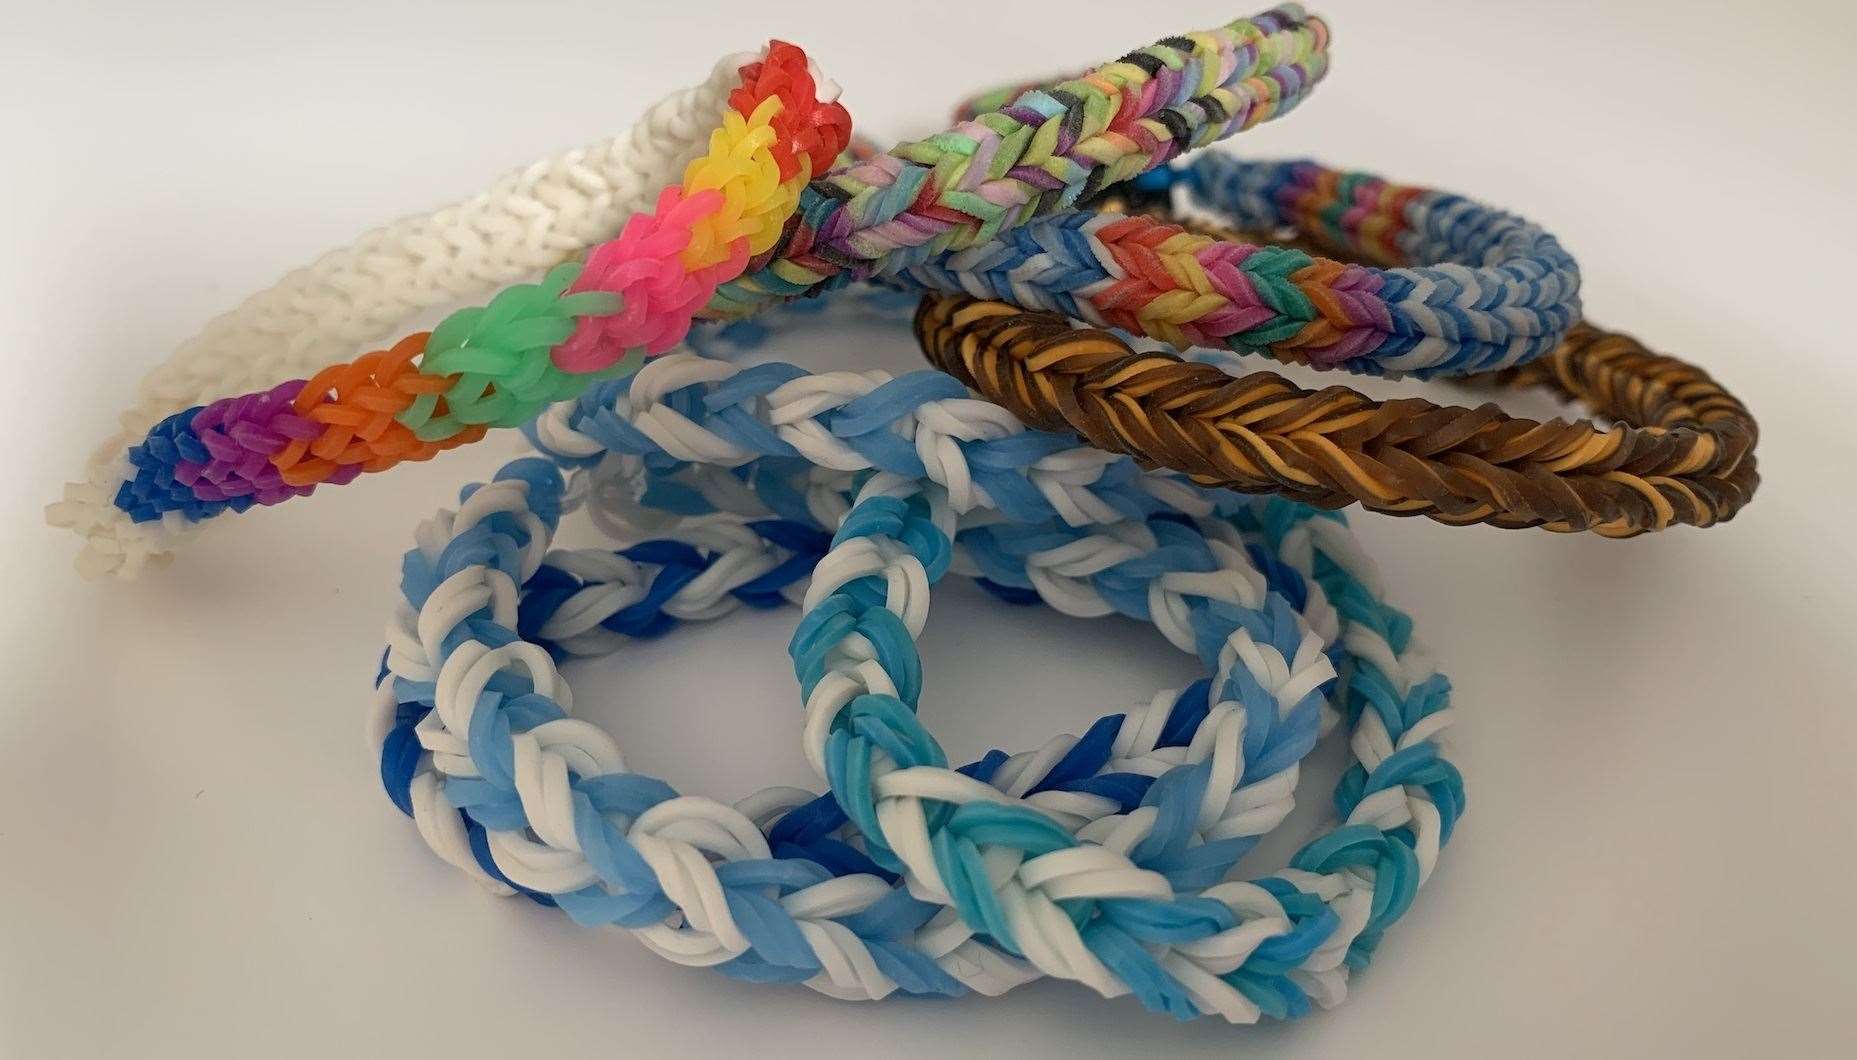 Mia has sold hundreds of bracelets since starting the project three weeks ago